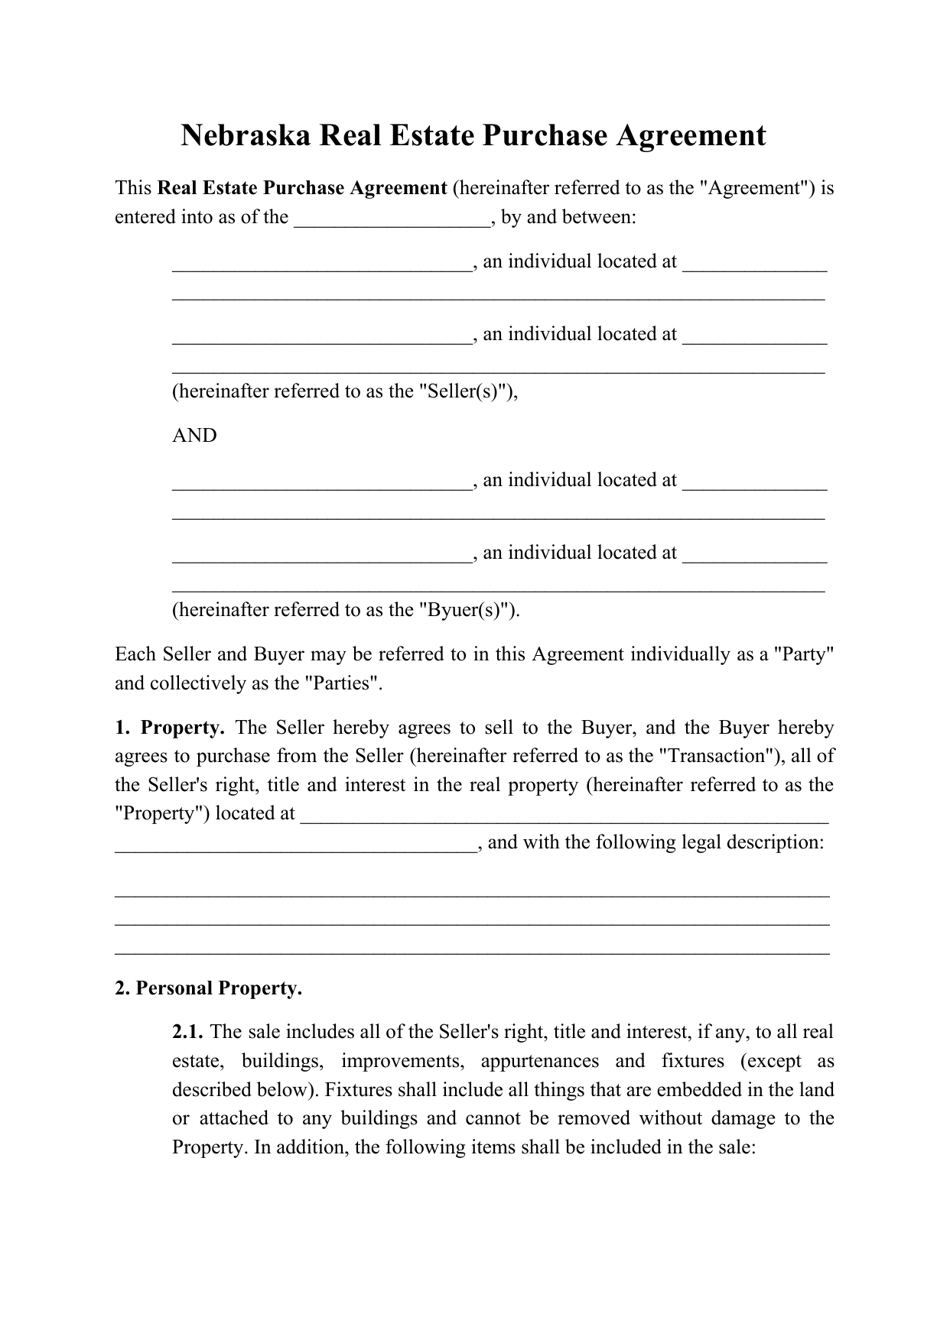 Real Estate Purchase Agreement Template - Nebraska, Page 1